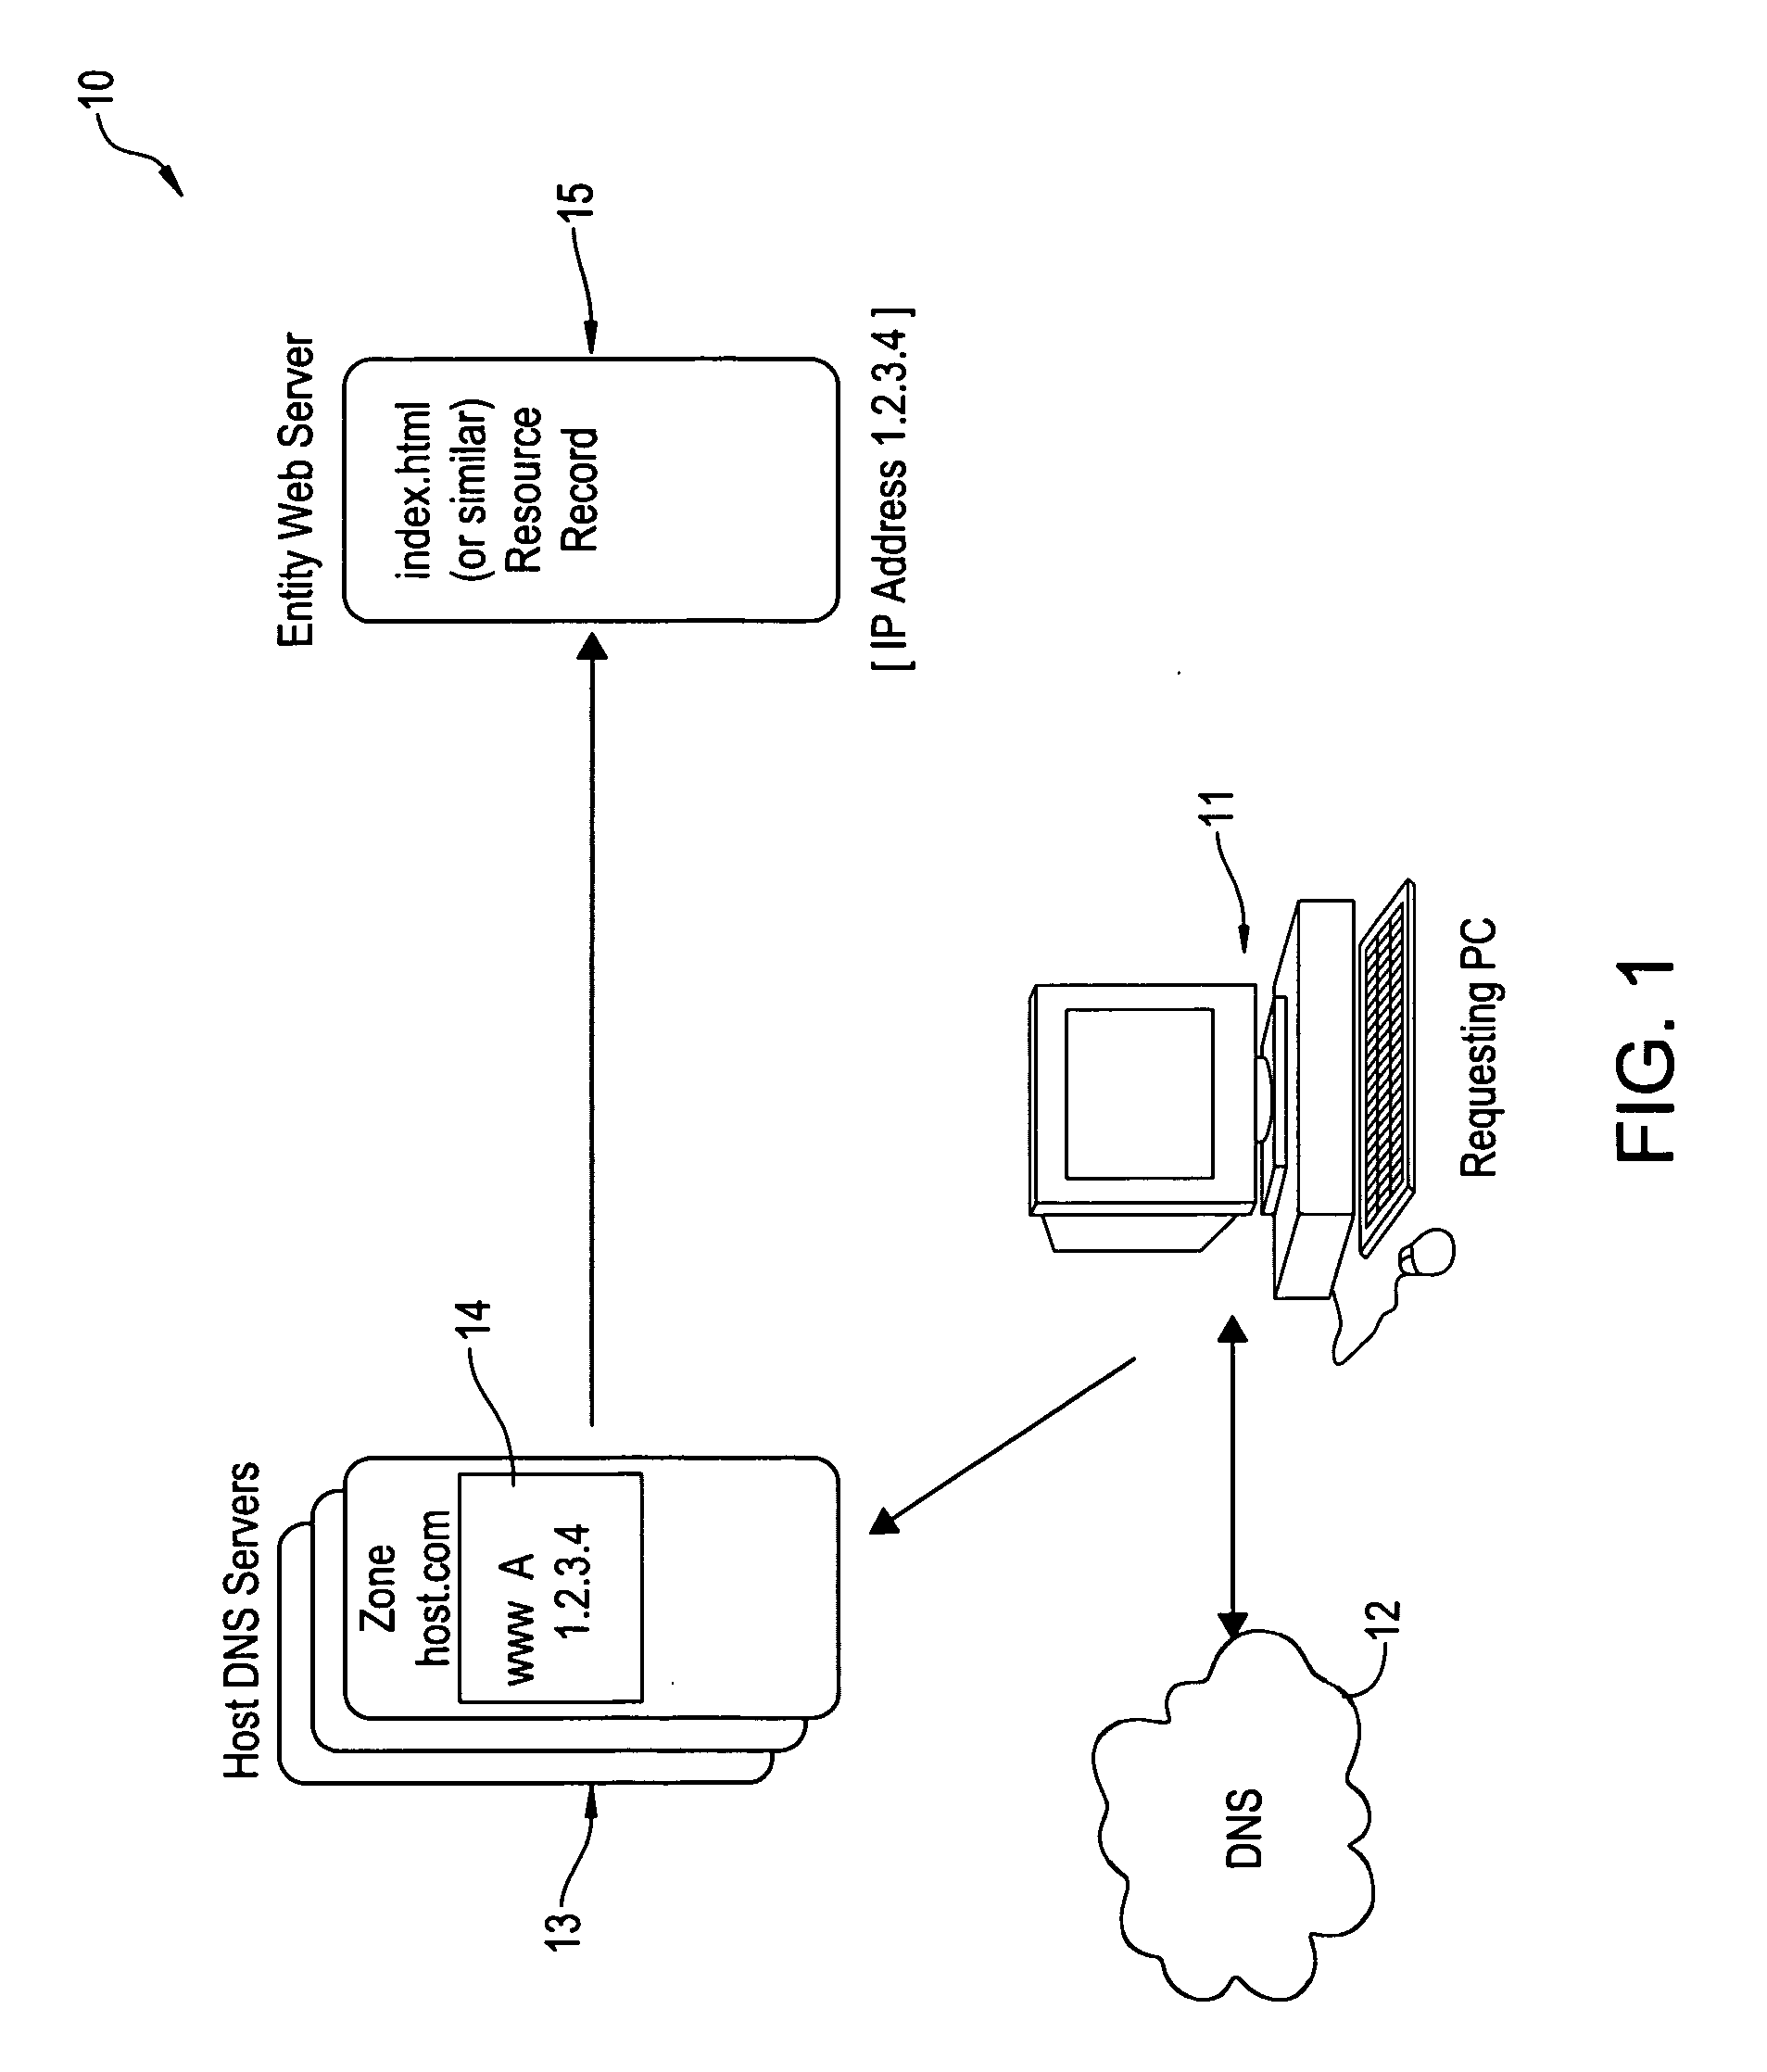 System and Method For Redirecting A Website Upon The Occurrence Of A Disaster Or Emergency Event